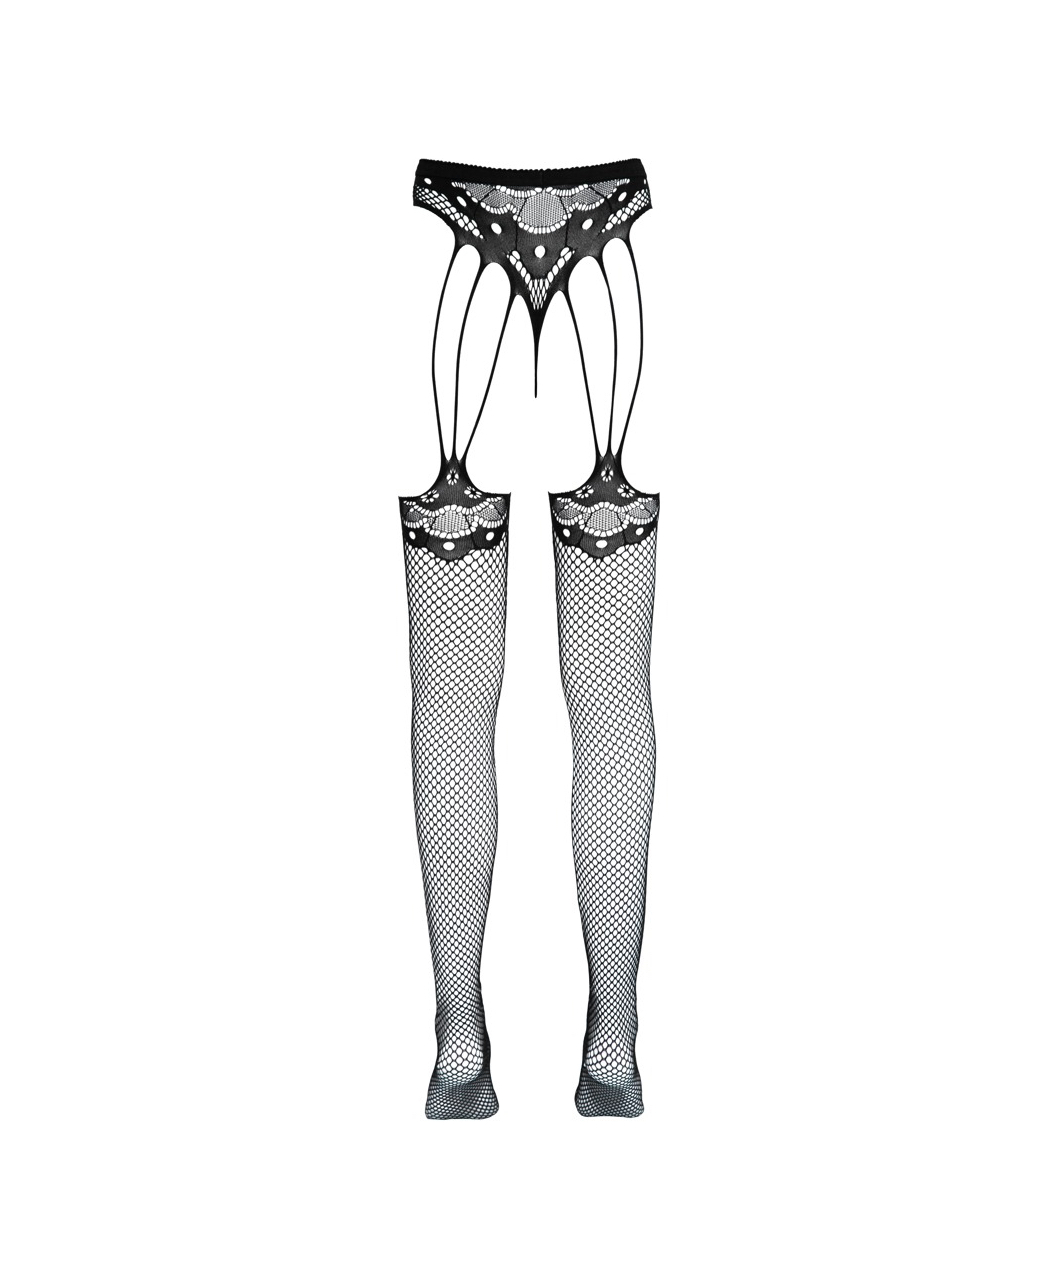 Cottelli Lingerie black net crotchless tights with cutouts